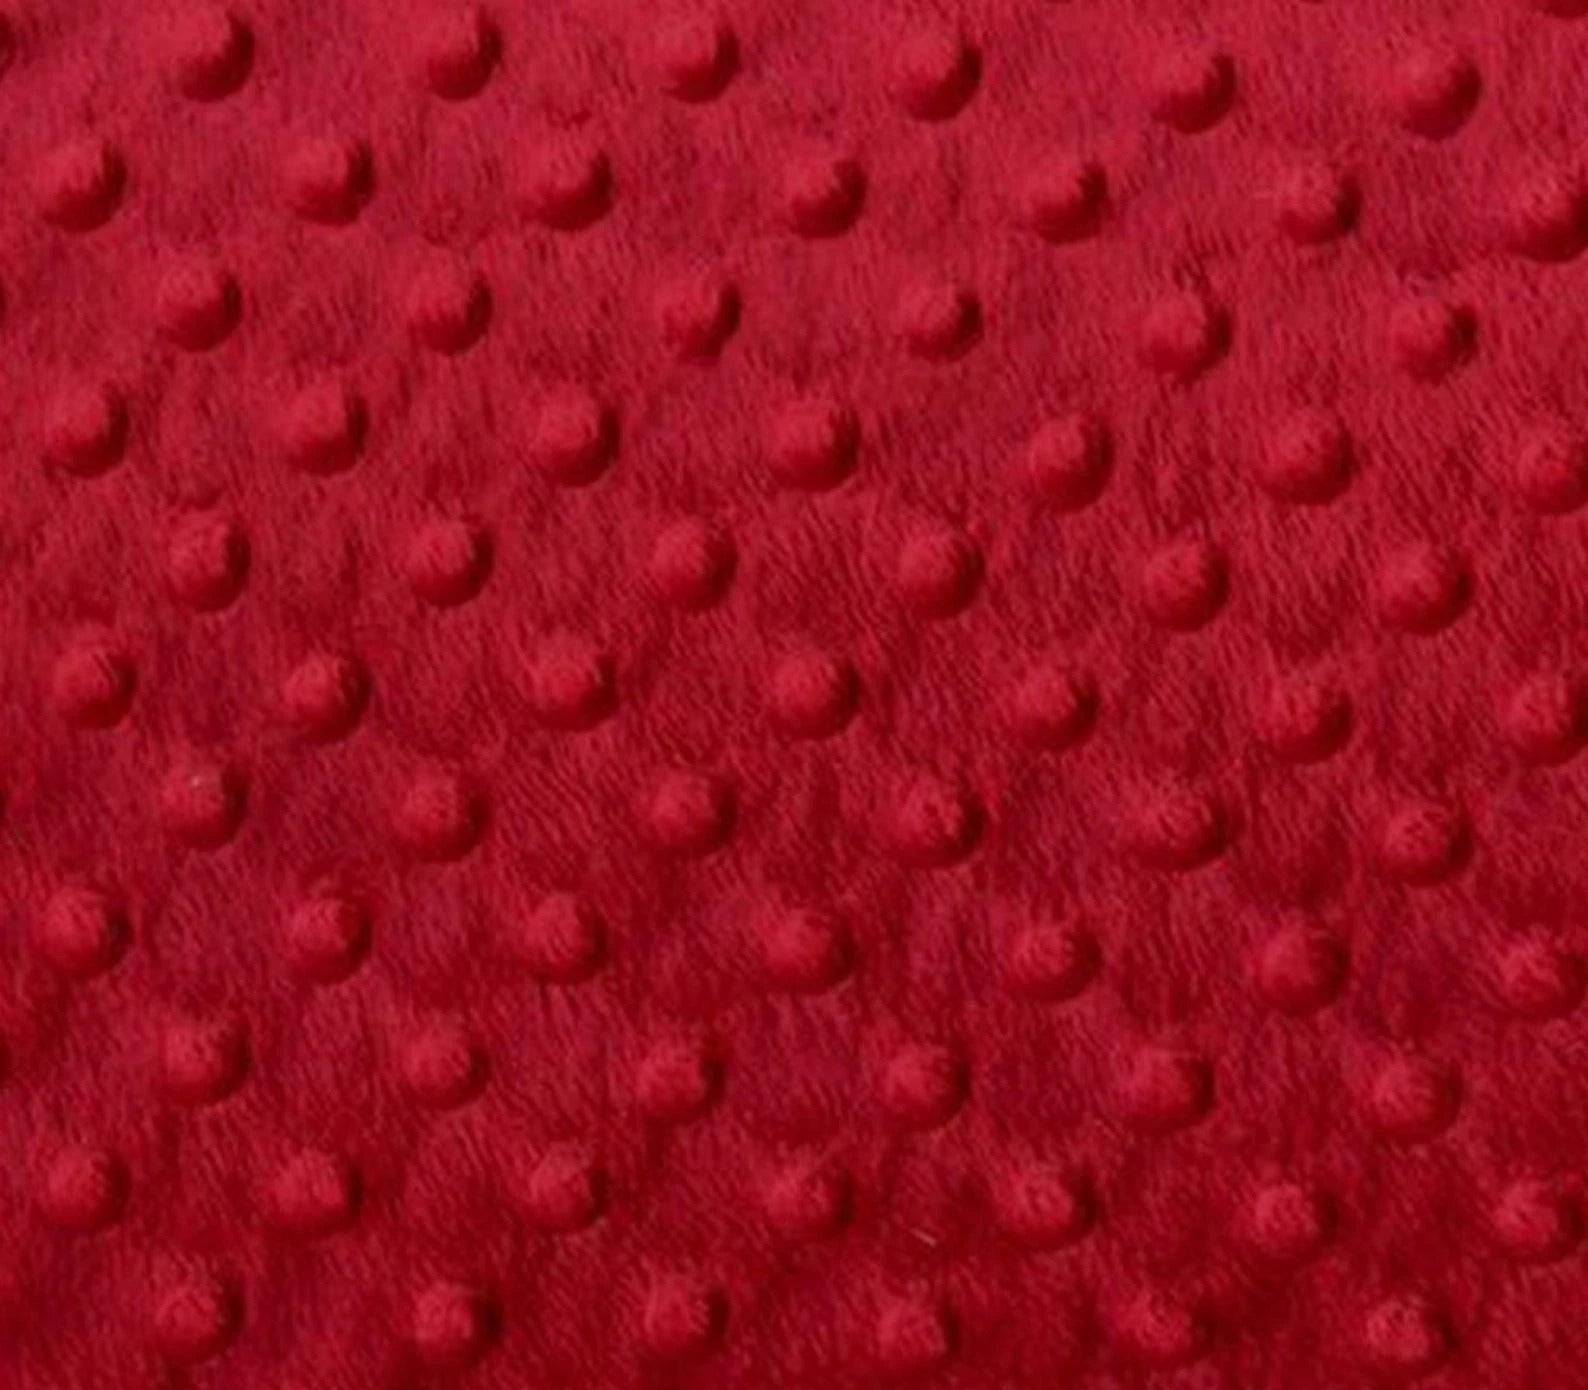 Dimple Dot Minky Fabric Sold By The Yard - 36"/ 58"MinkyICEFABRICICE FABRICSRedBy The Yard (60 inches Wide)Dimple Dot Minky Fabric Sold By The Yard - 36"/ 58" ICEFABRIC Red